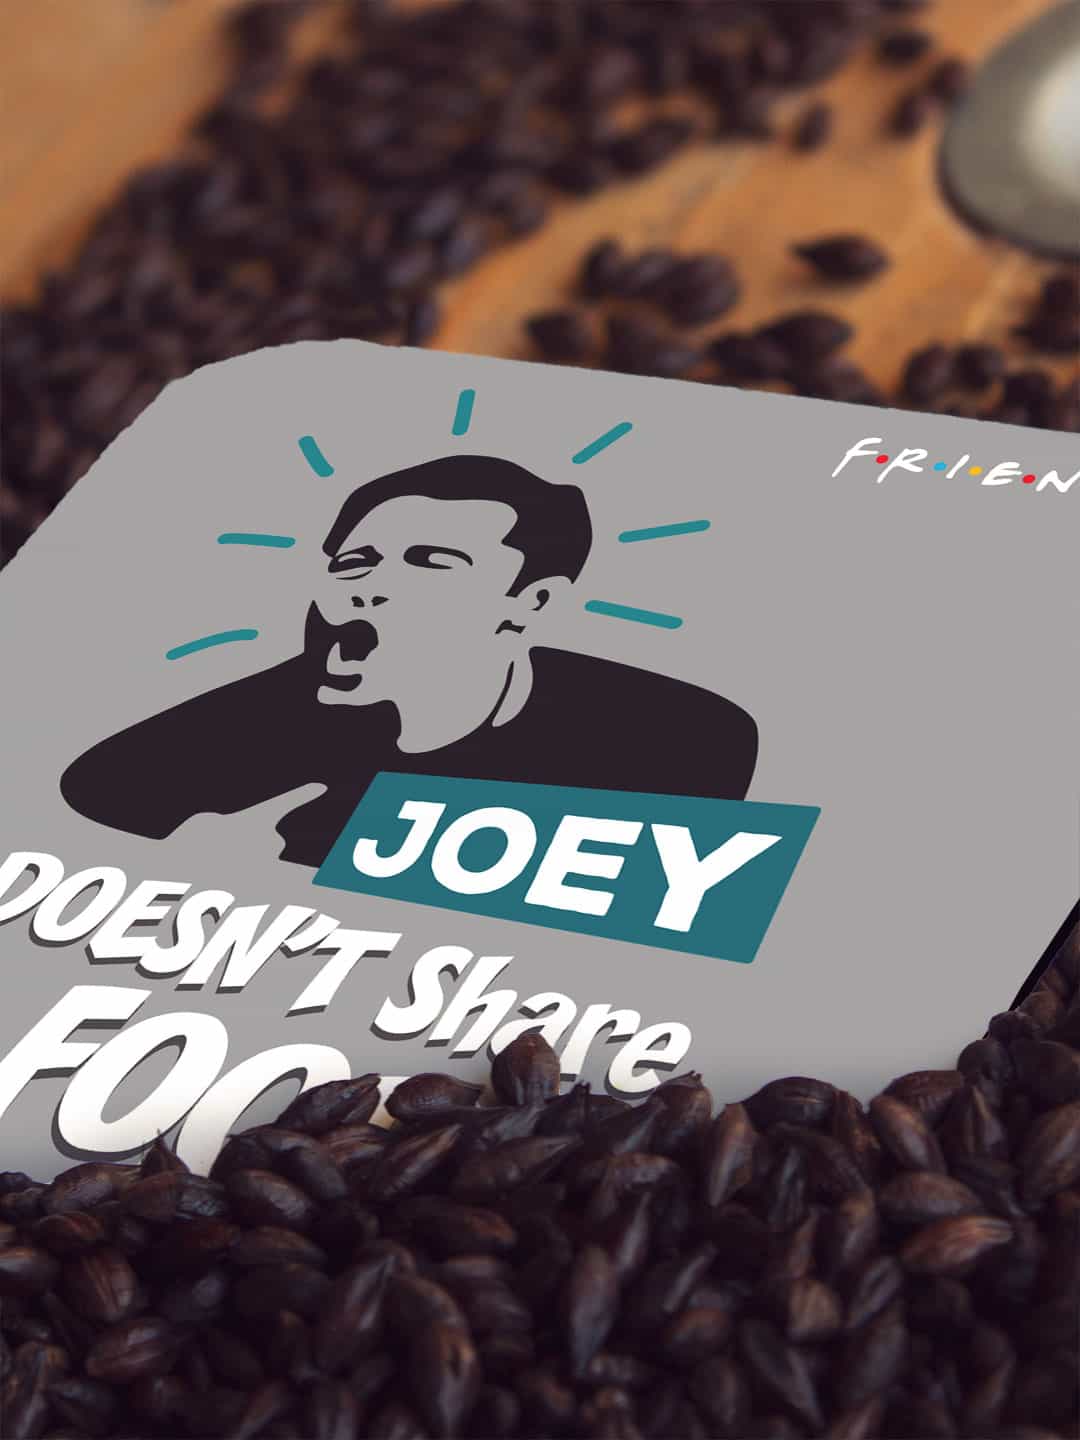 Friends Joey doesnt share food - 10 X 10 (cm) Coaster